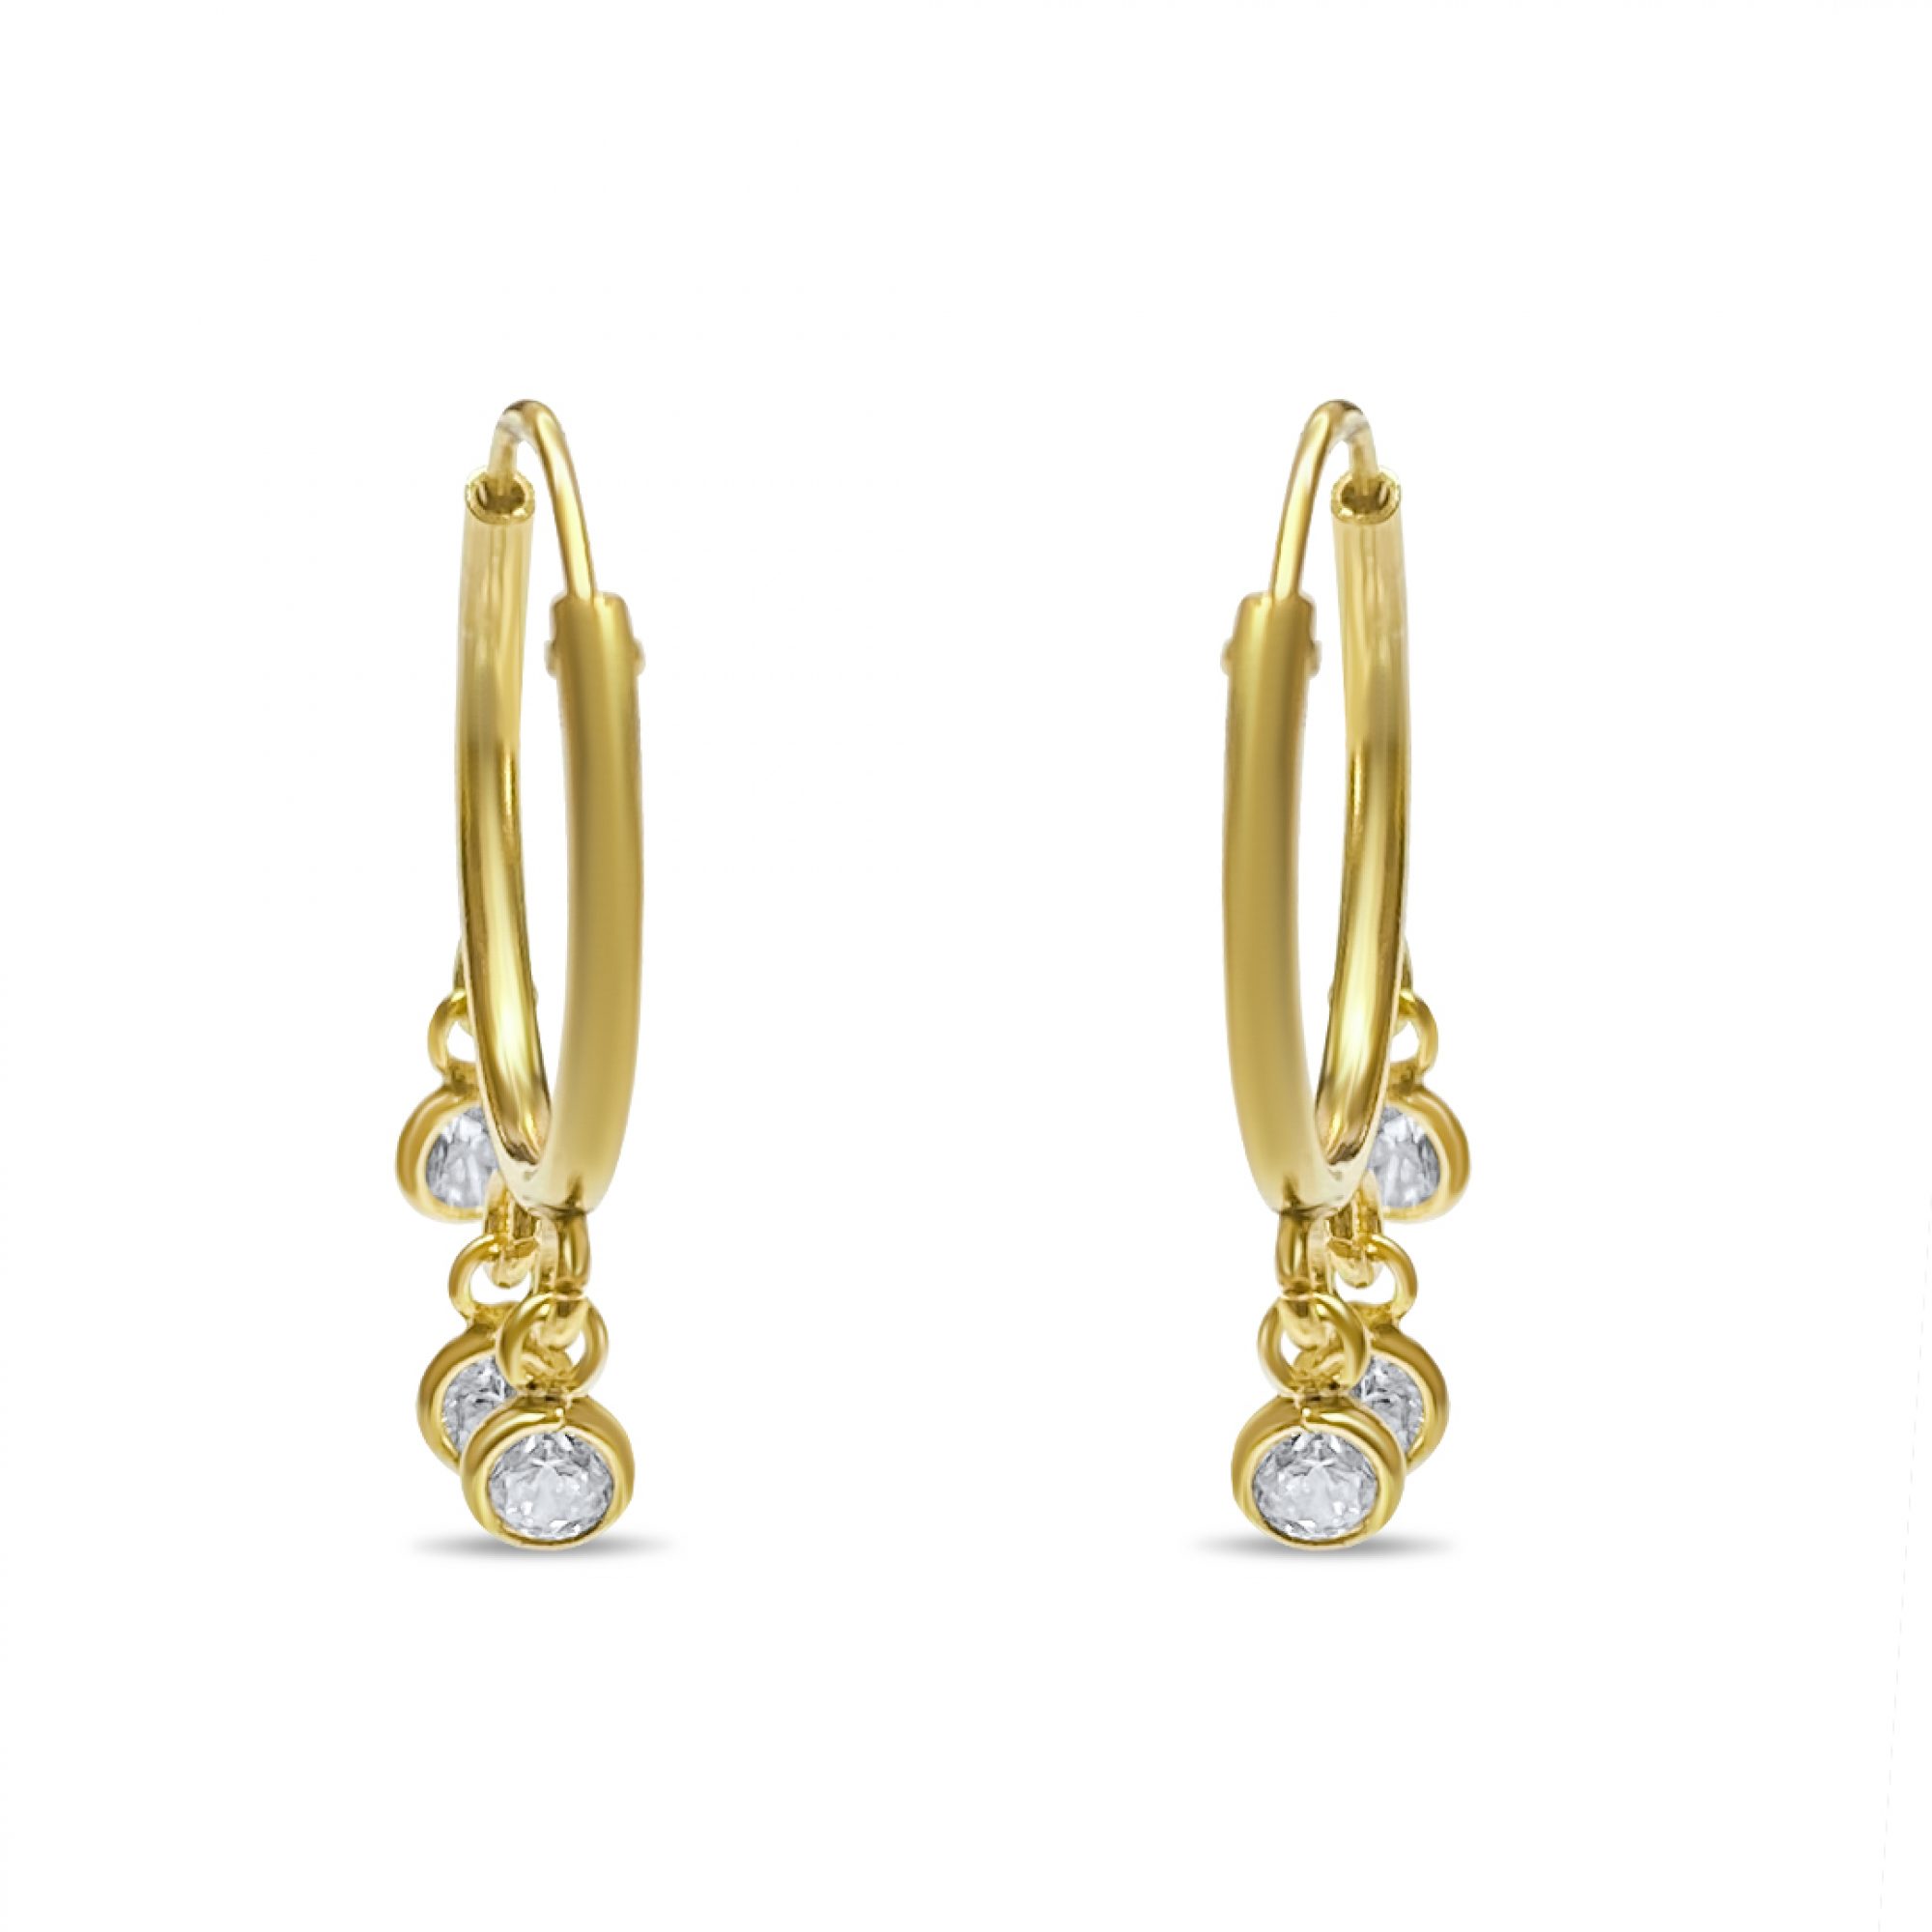 Gold plated earrings with dangle zircon stones